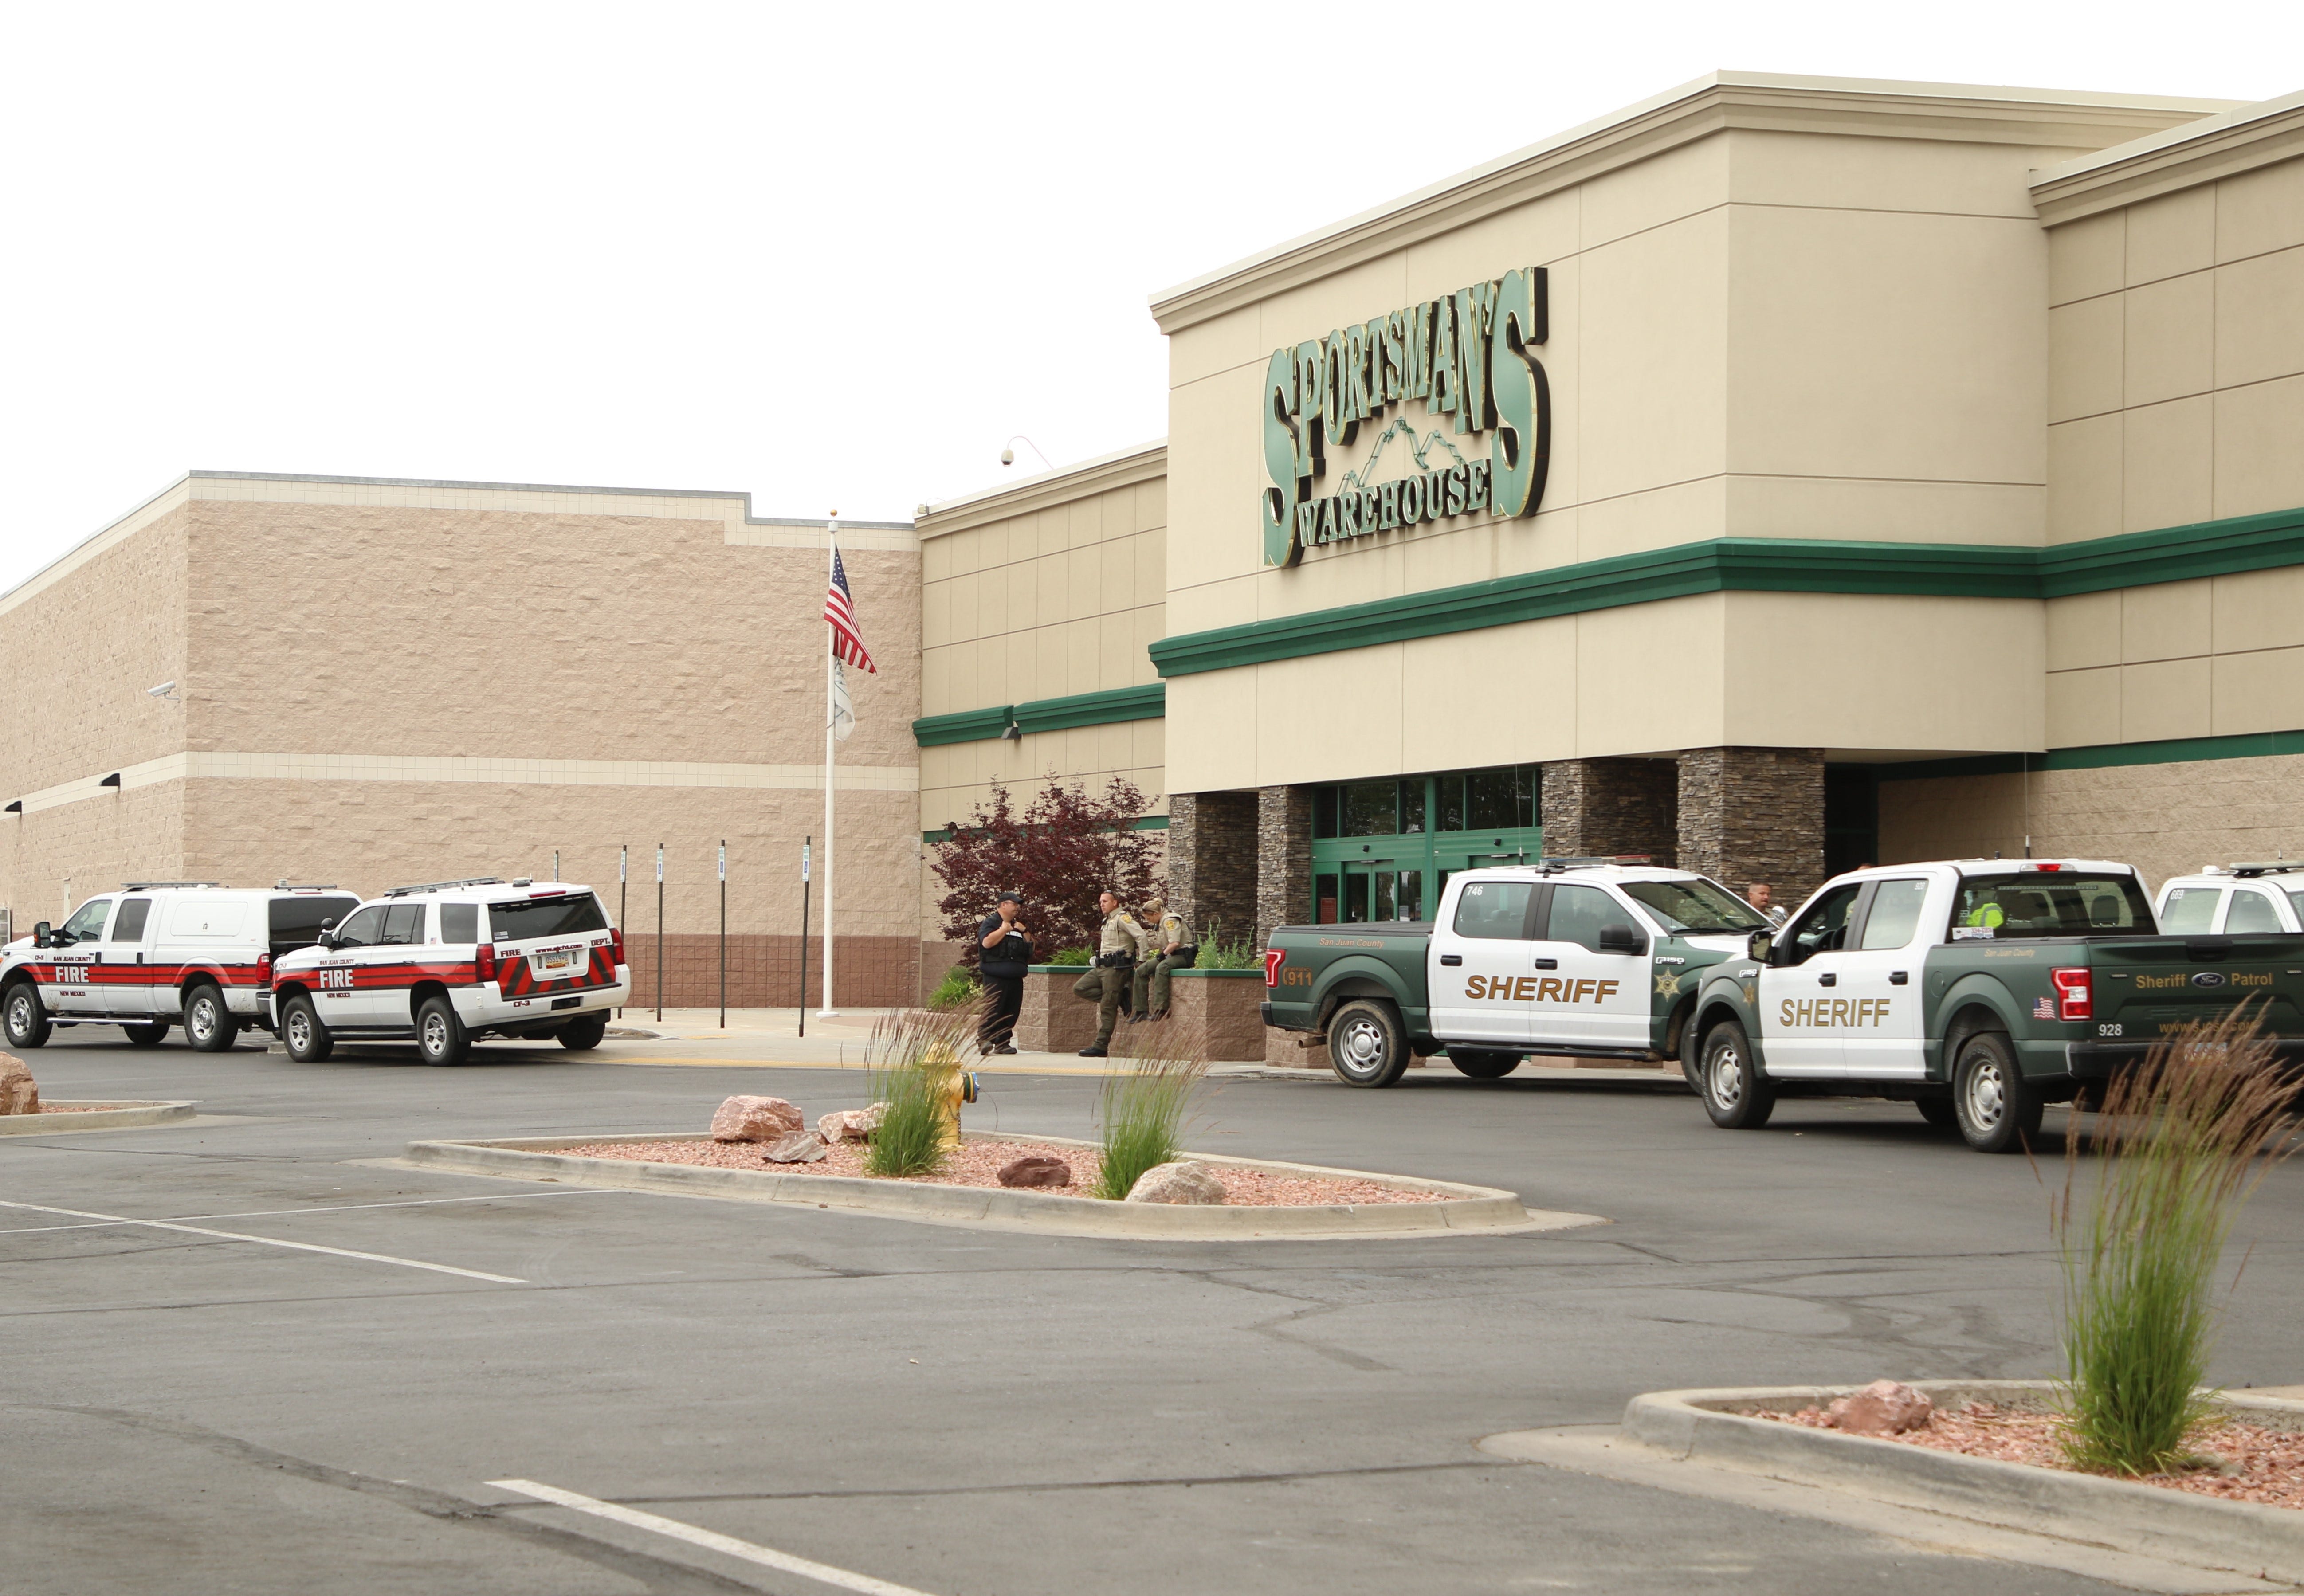 Public safety personnel wait at Four Corners MarketPlace in Farmington as a protest over George Floyd's death took place near Animas Valley Mall on June 1.